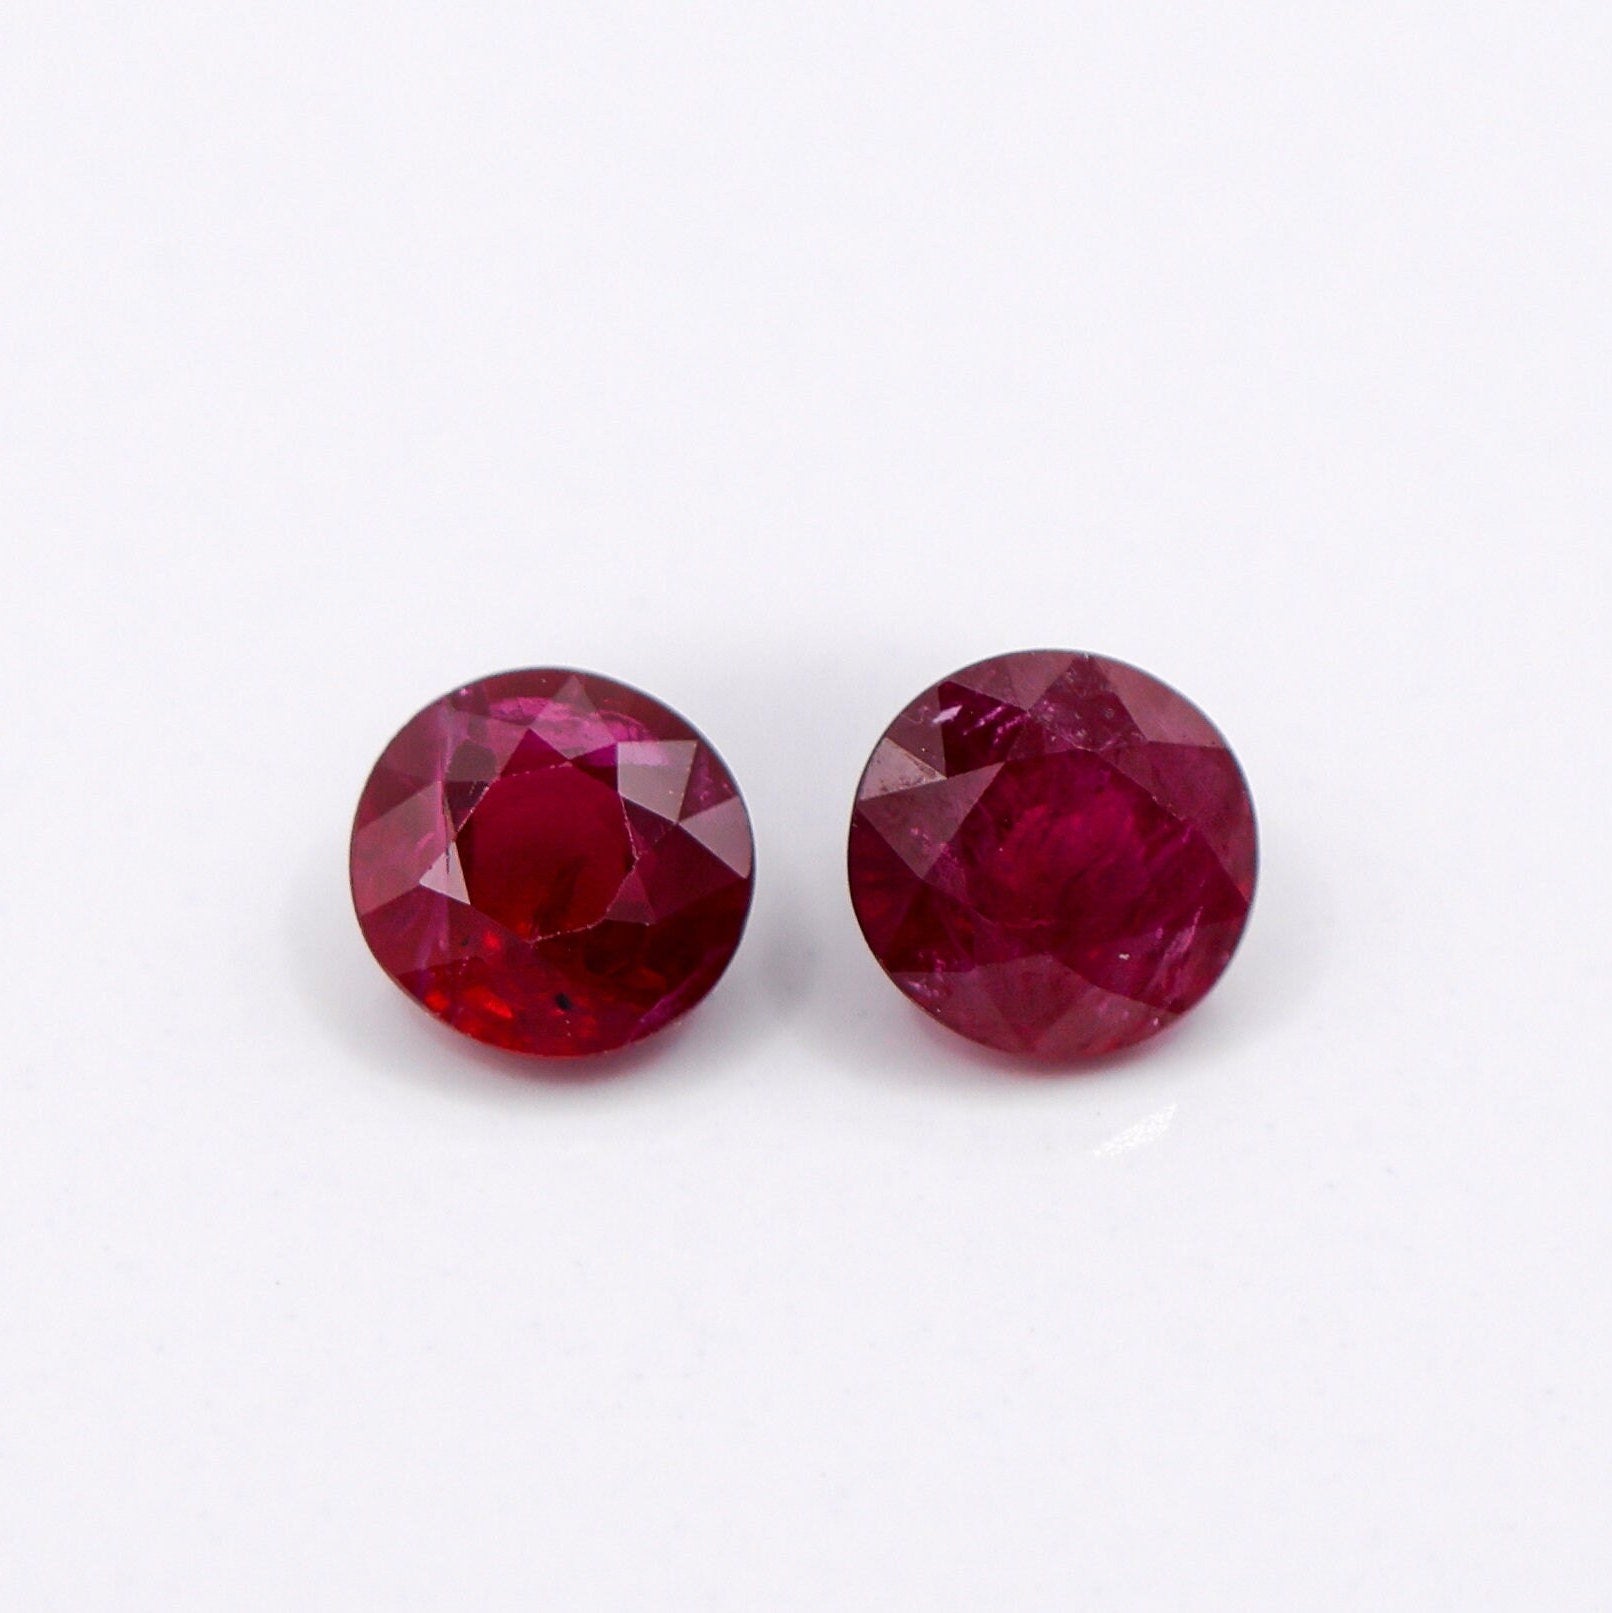 Gemstones-Natural Red Ruby Loose Gemstones || Round 5mm || Pigeon Blood Red || Jewelry Setting || Fissure Filled || Certified || - NNJGemstones